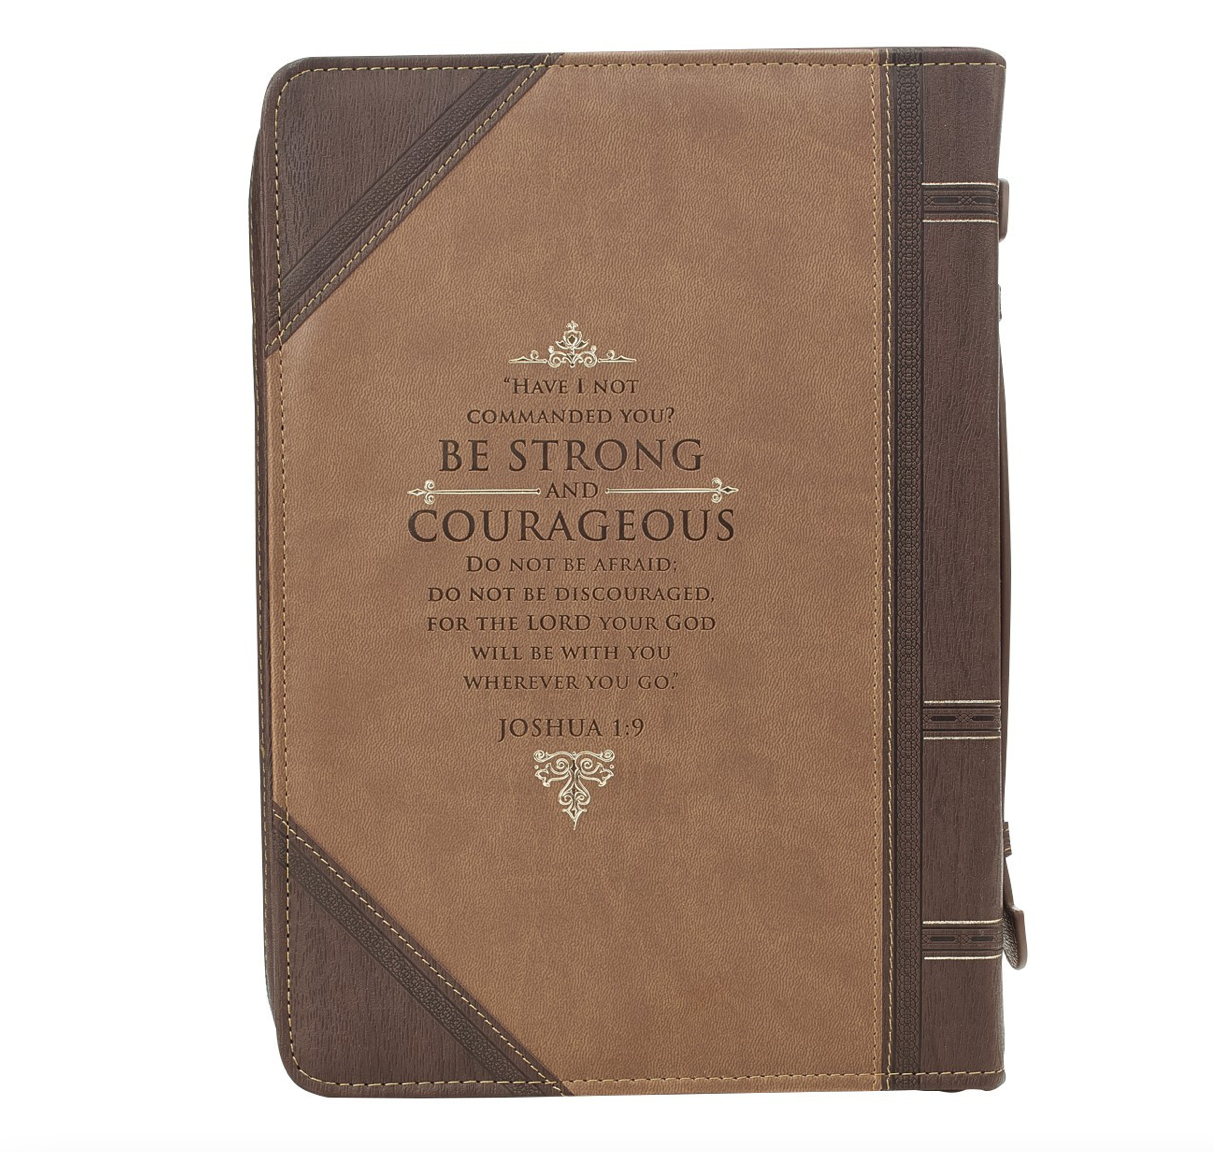 Be Strong and Courageous Portfolio Design Faux Leather Classic Bible Cover - Joshua 1:9 (LARGE)